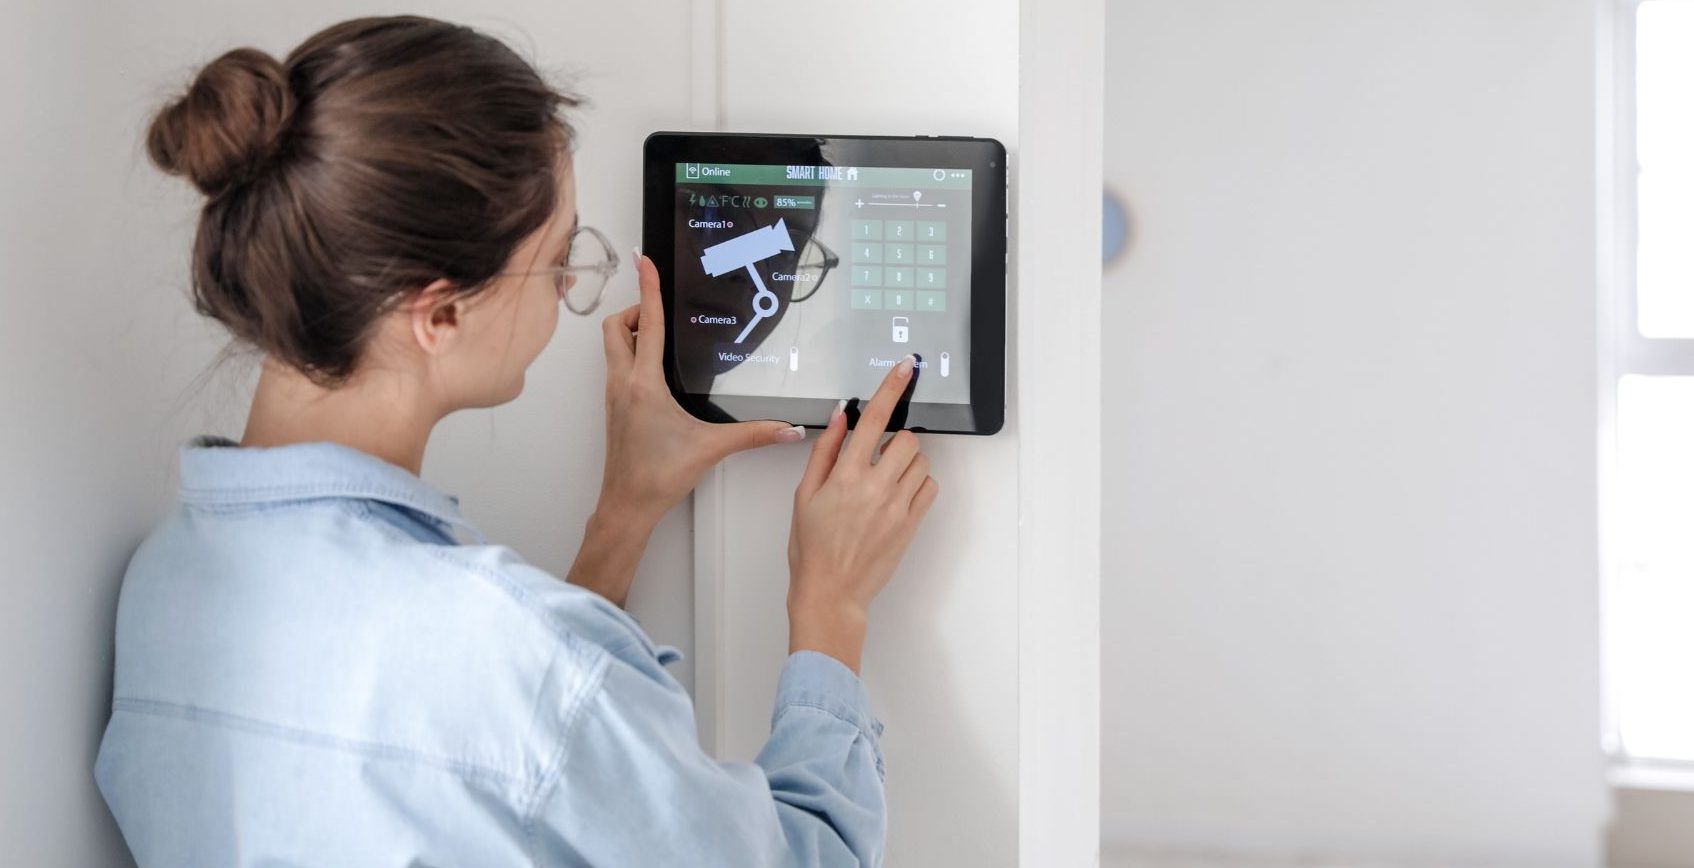 Global Home Security System Market Outlook, Opportunities And Strategies